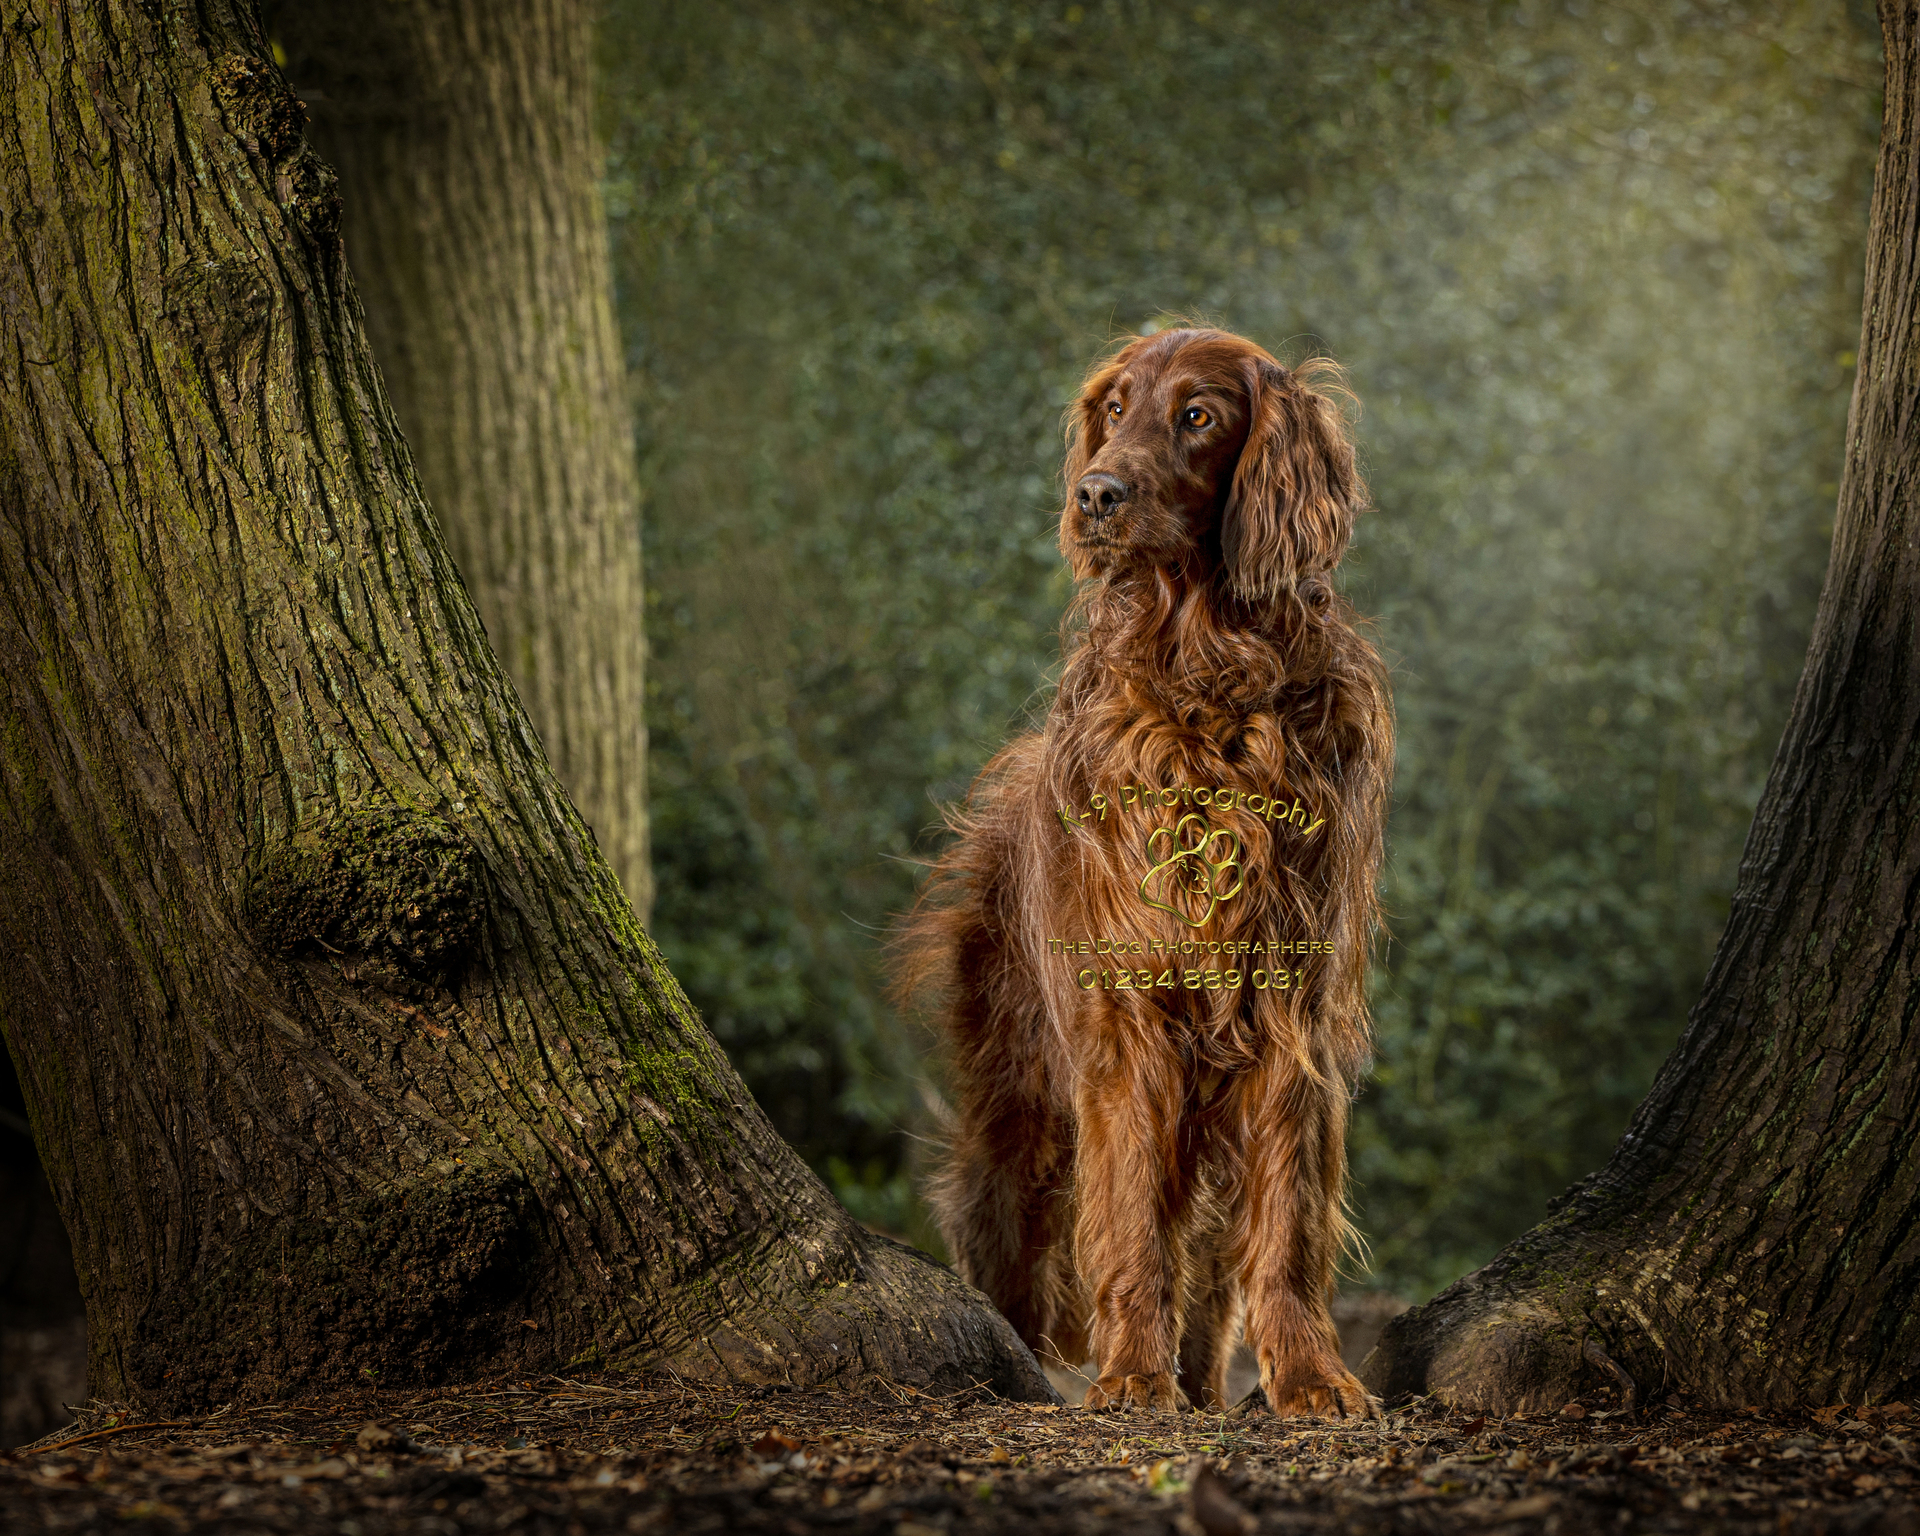 Stunning dog portrait in a picturesque location